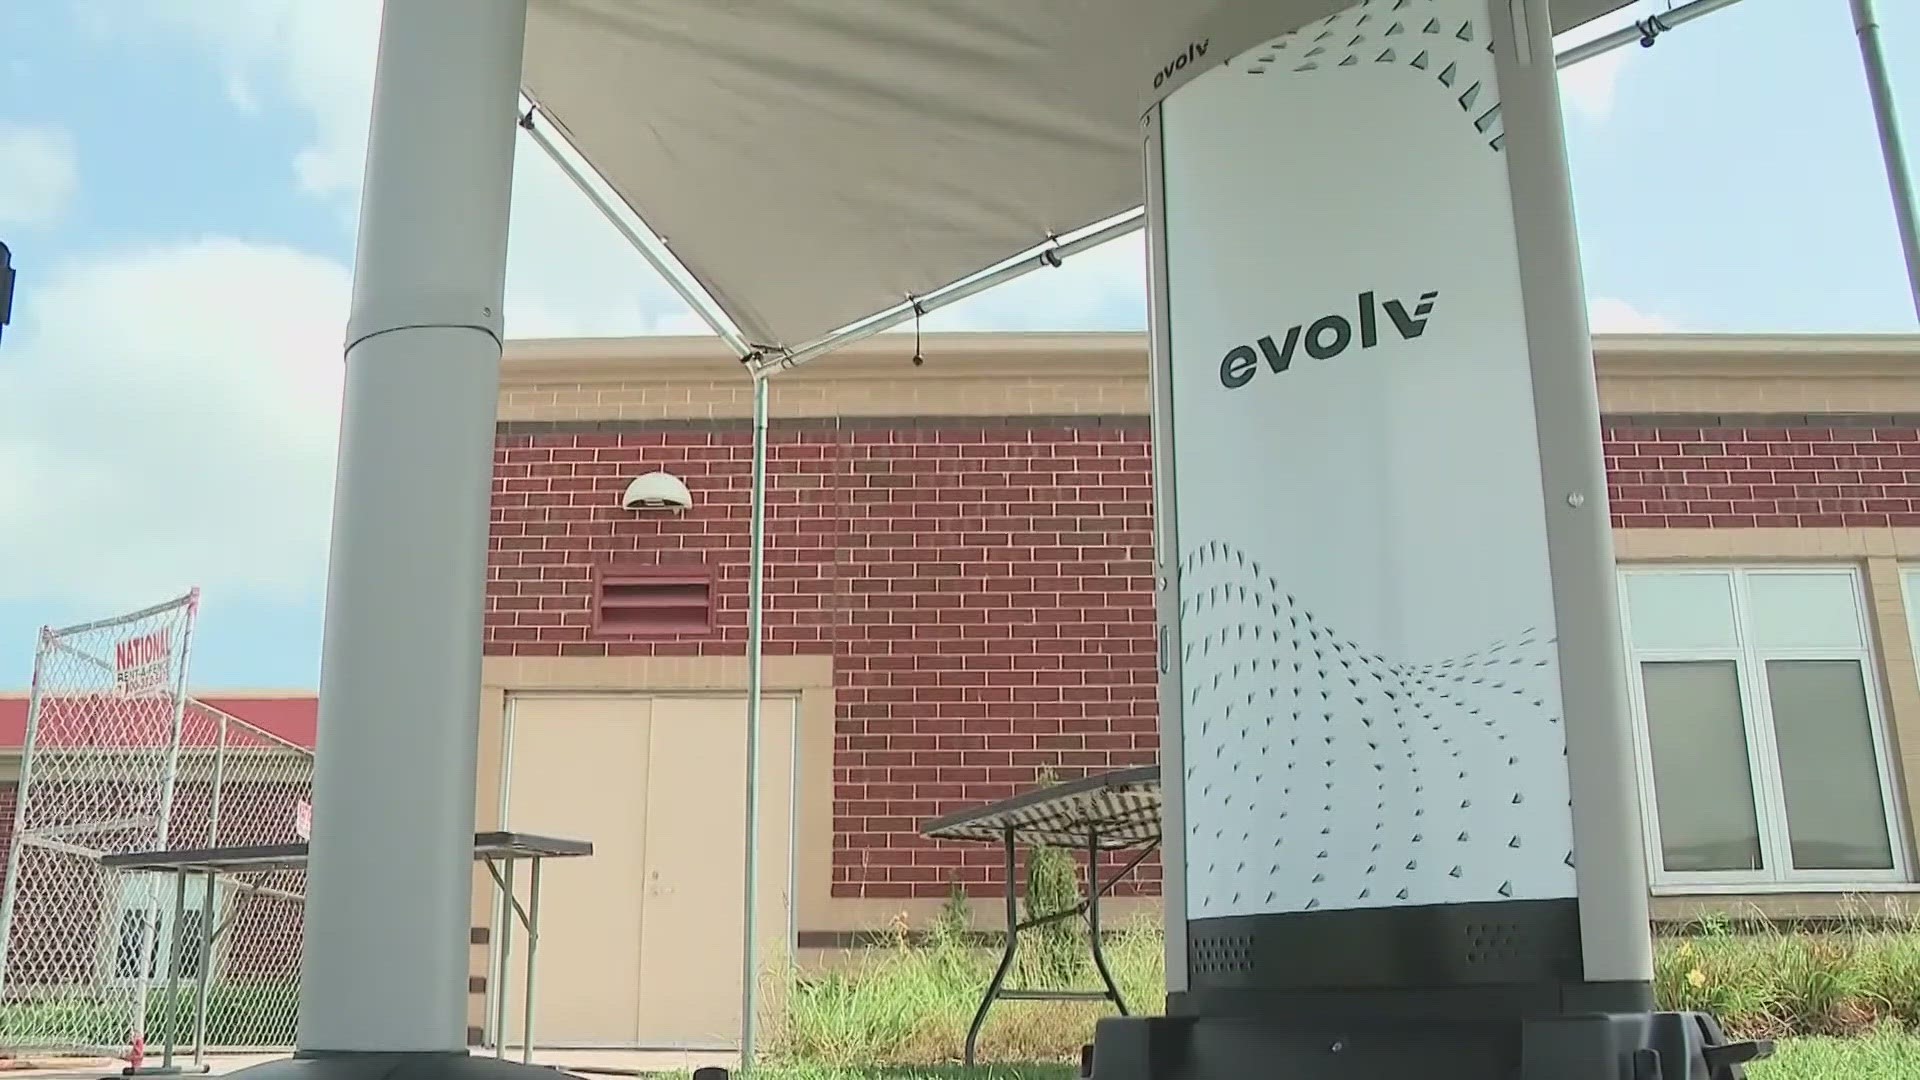 The EVOLV security system is already in place at the zoo's waterpark, Zoombezi Bay.